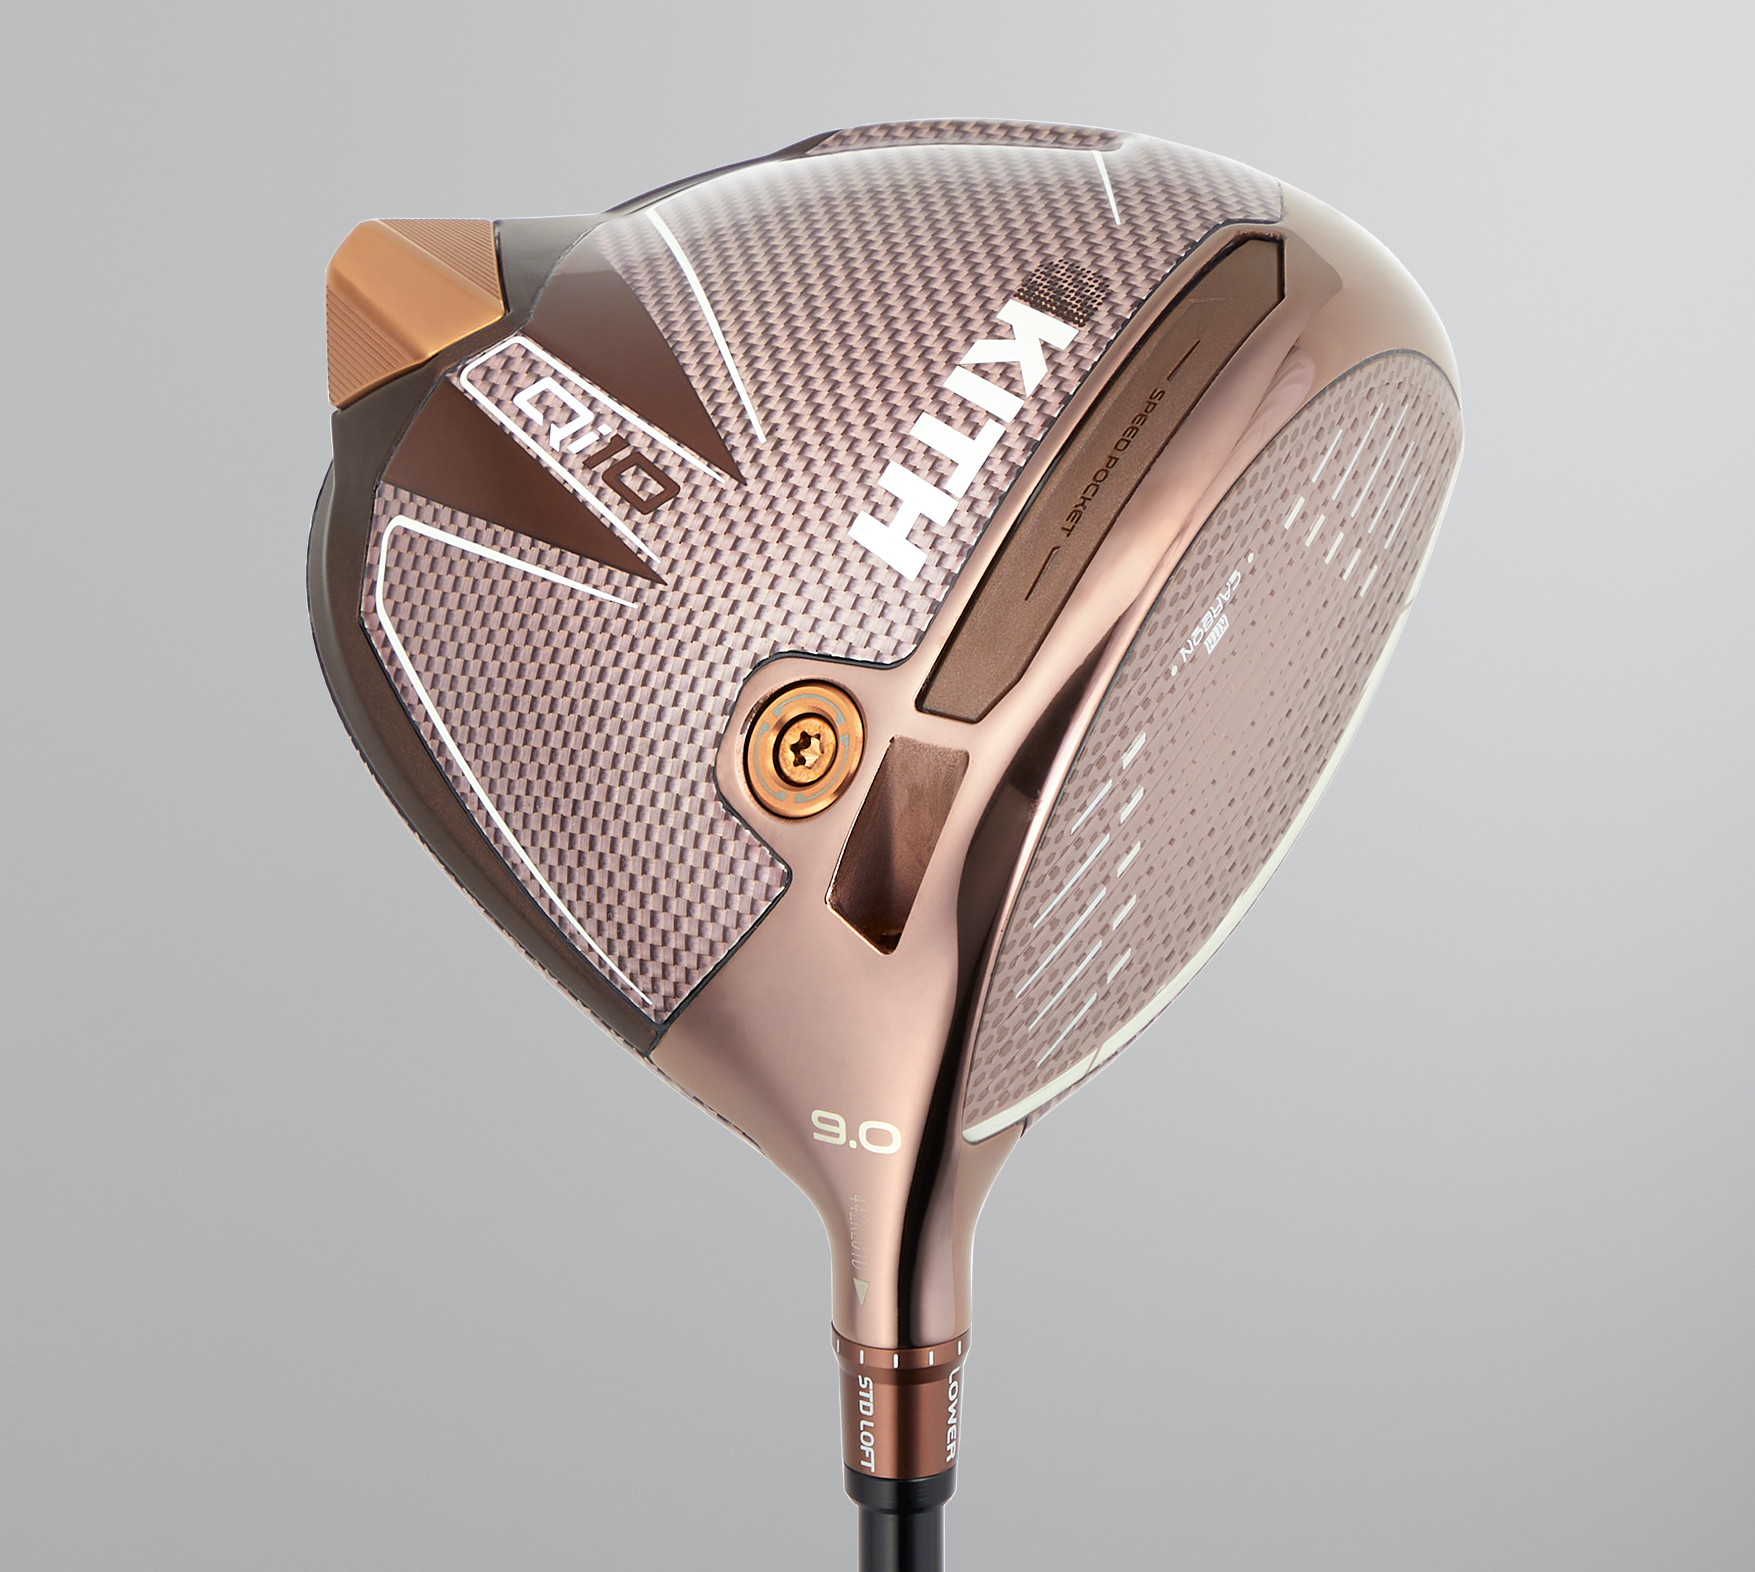 2nd TaylorMade x Kith collaboration features Qi10 driver